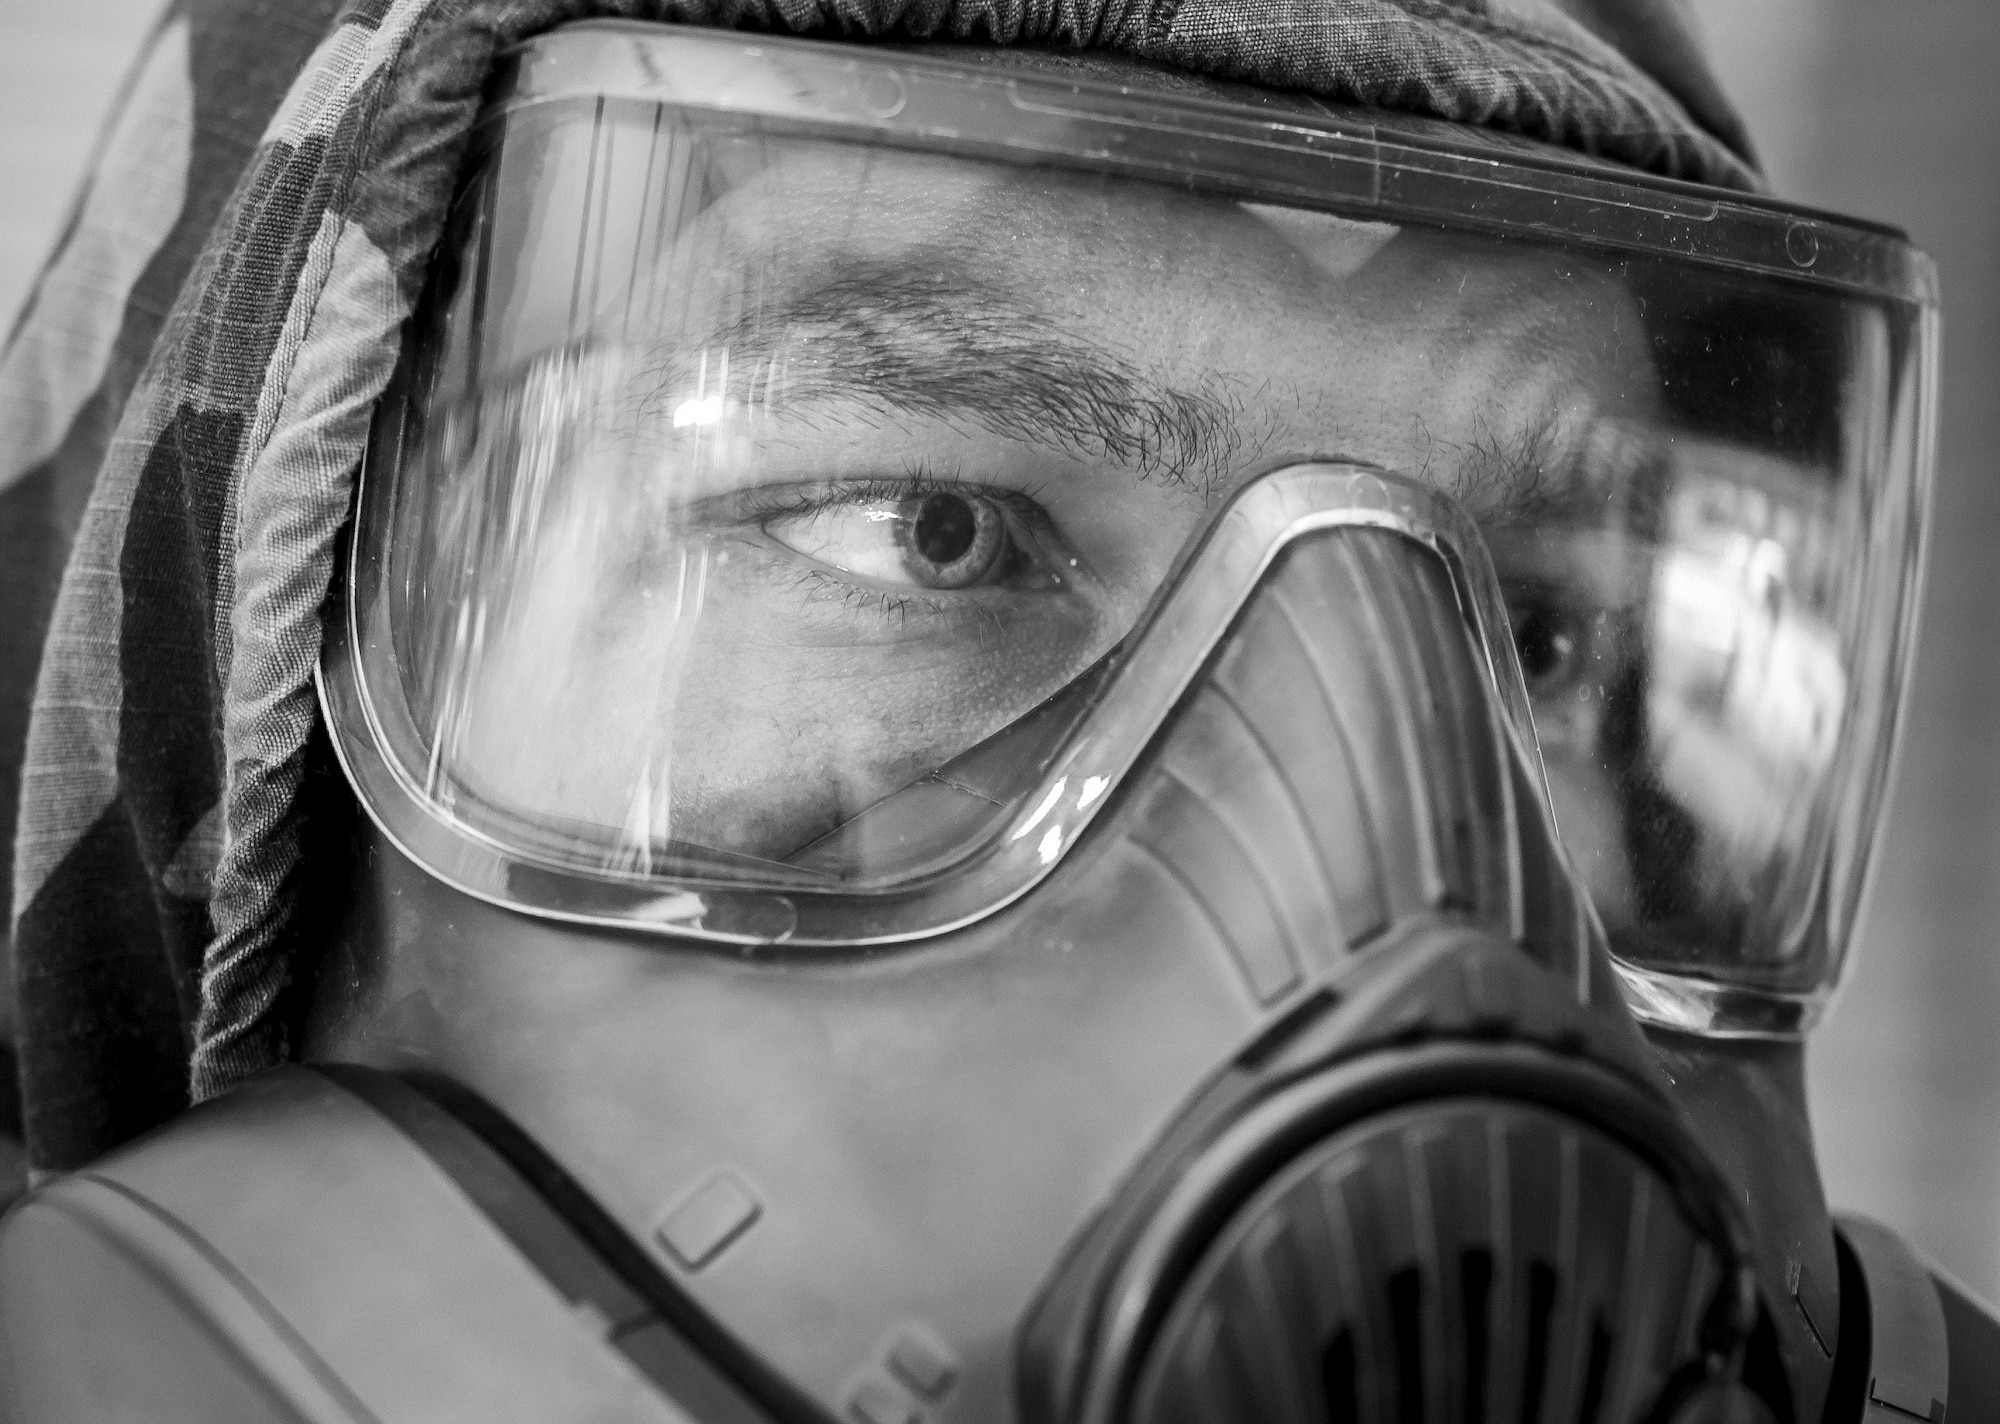 An Airman wears a gas mask during a chemical, biological, radiological, nuclear and explosives drill as part of Exercise Crescent Reach 16, May 19, 2016, at Joint Base Charleston, S.C. The exercise tested JB Charleston’s ability to launch a large aircraft formation and mobilize a large amount of cargo and passengers. (U.S. Air Force photo/Staff Sgt. Jared Trimarchi)